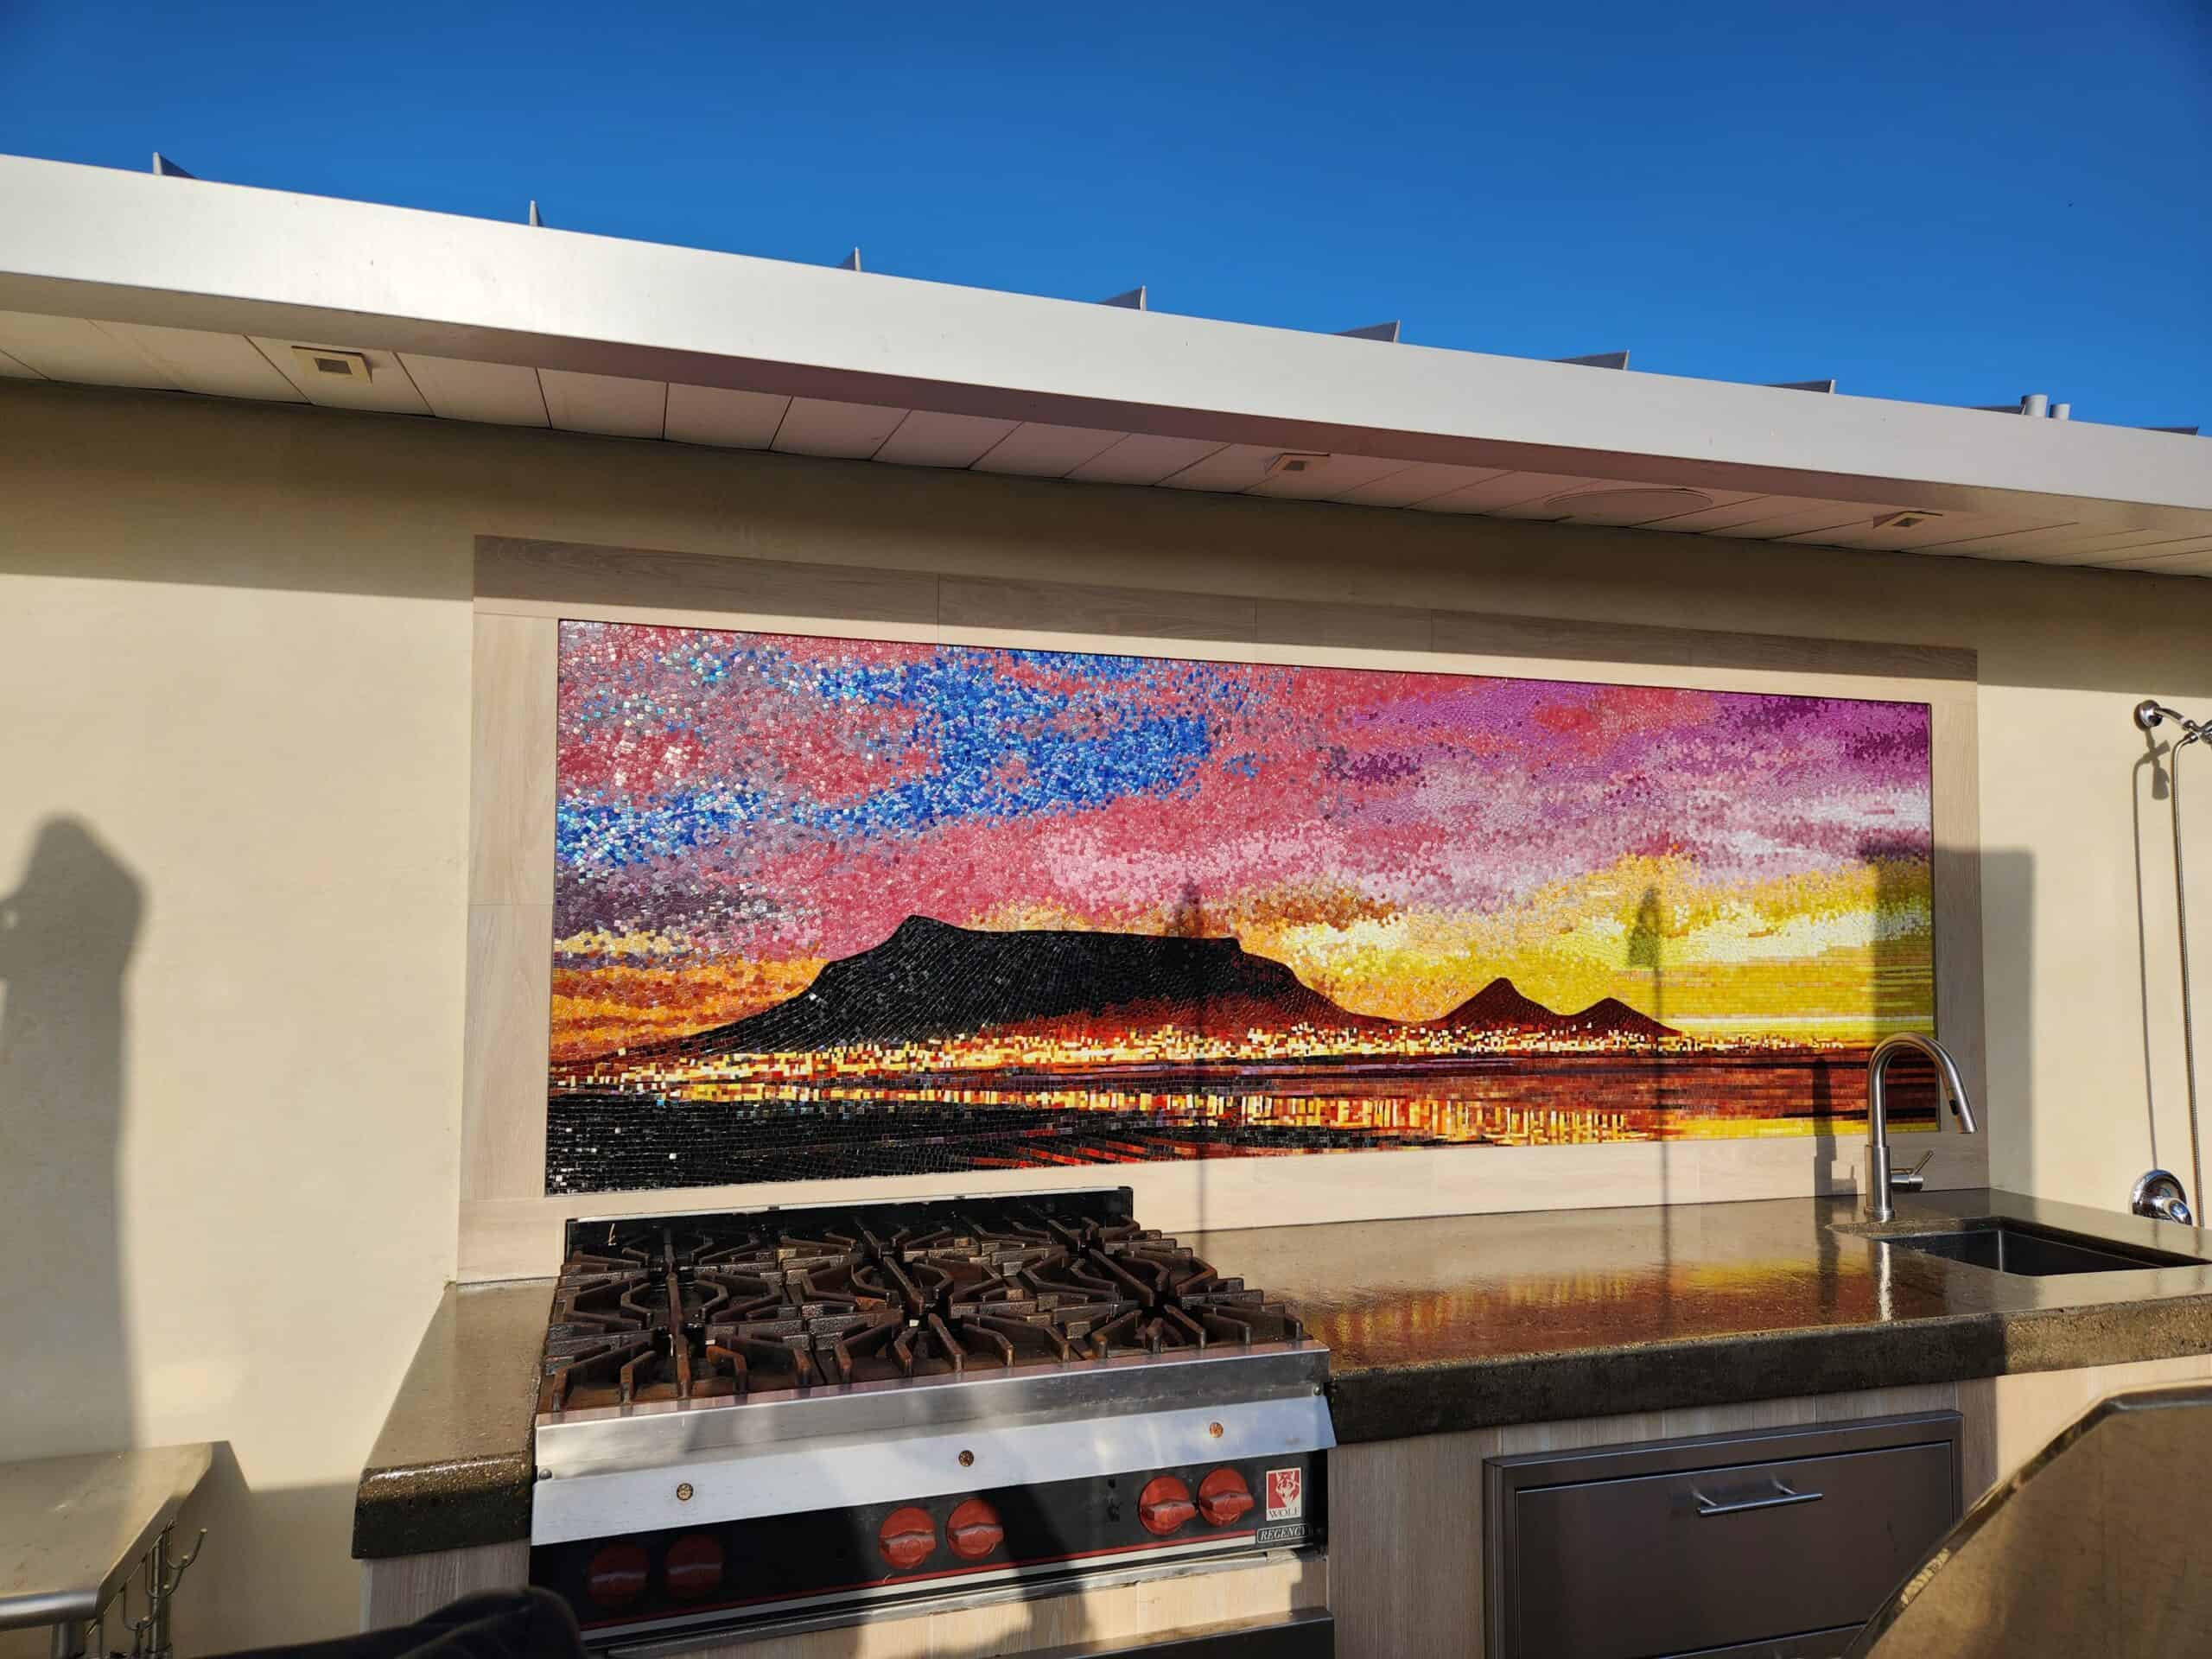 A colorful mosaic artwork depicting a sunset over mountains, installed above an outdoor kitchen area.